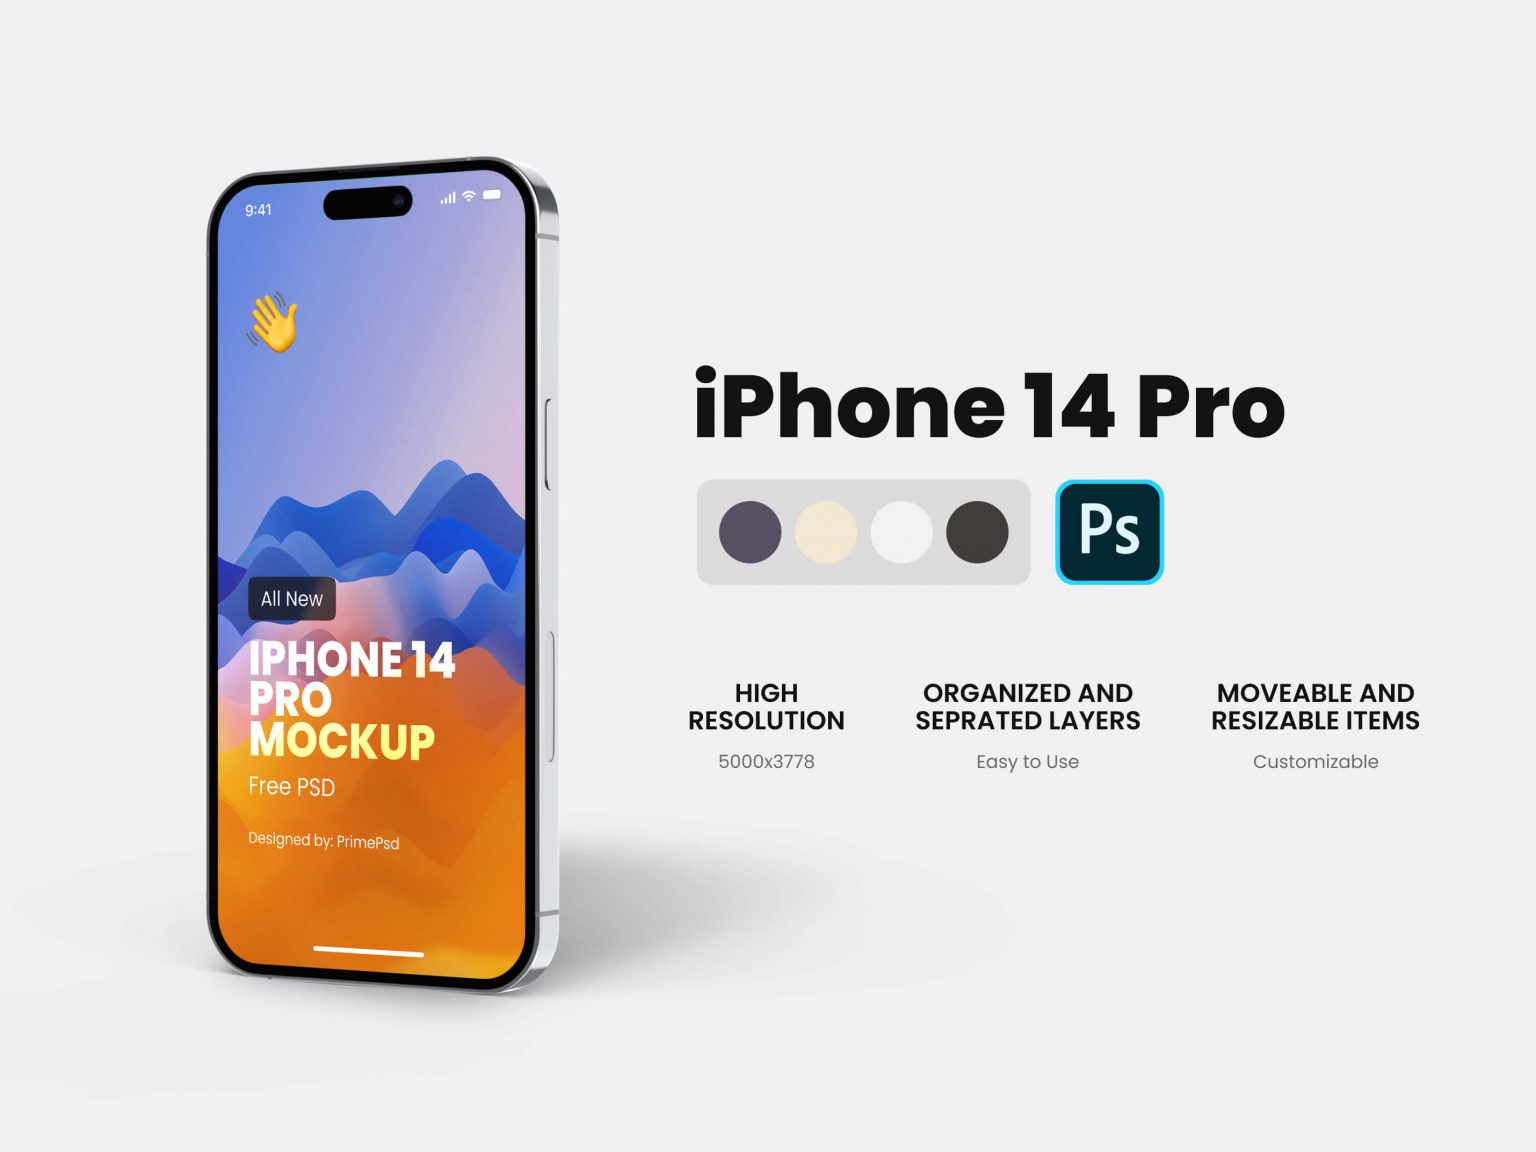 iPhone 14 Pro Perspective Mockup Free PSD - PrimePSD